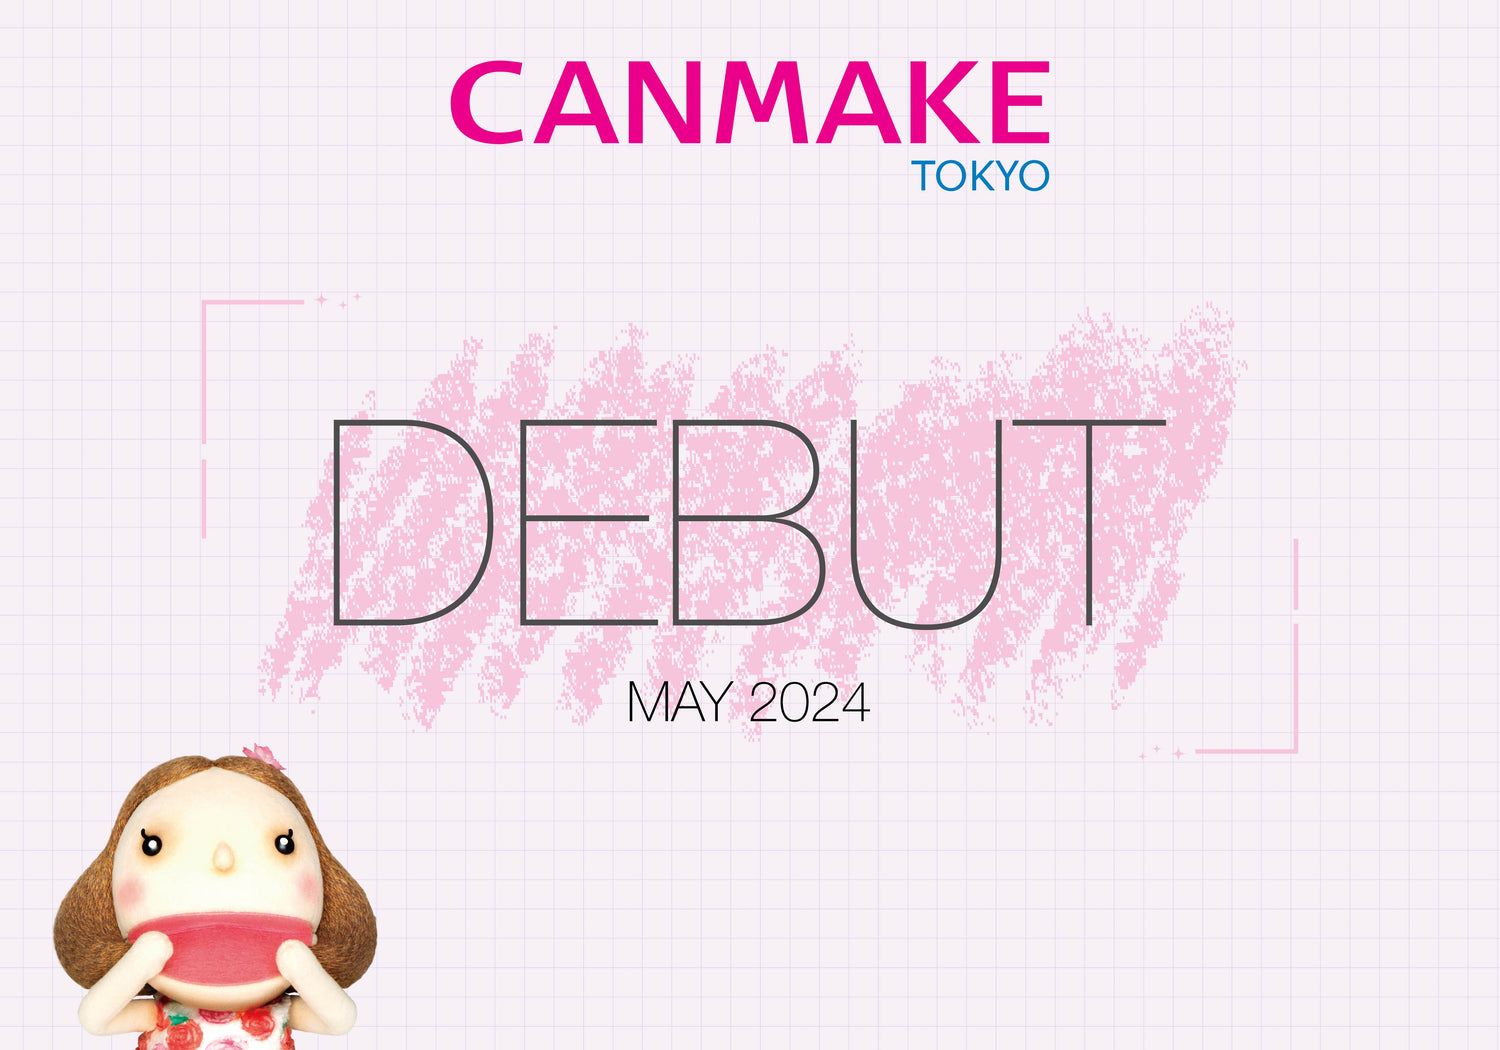 CANMAKE - One-Stop Destination  to discover NO#1  JAPANESE MAKEUP  launched in May 2024